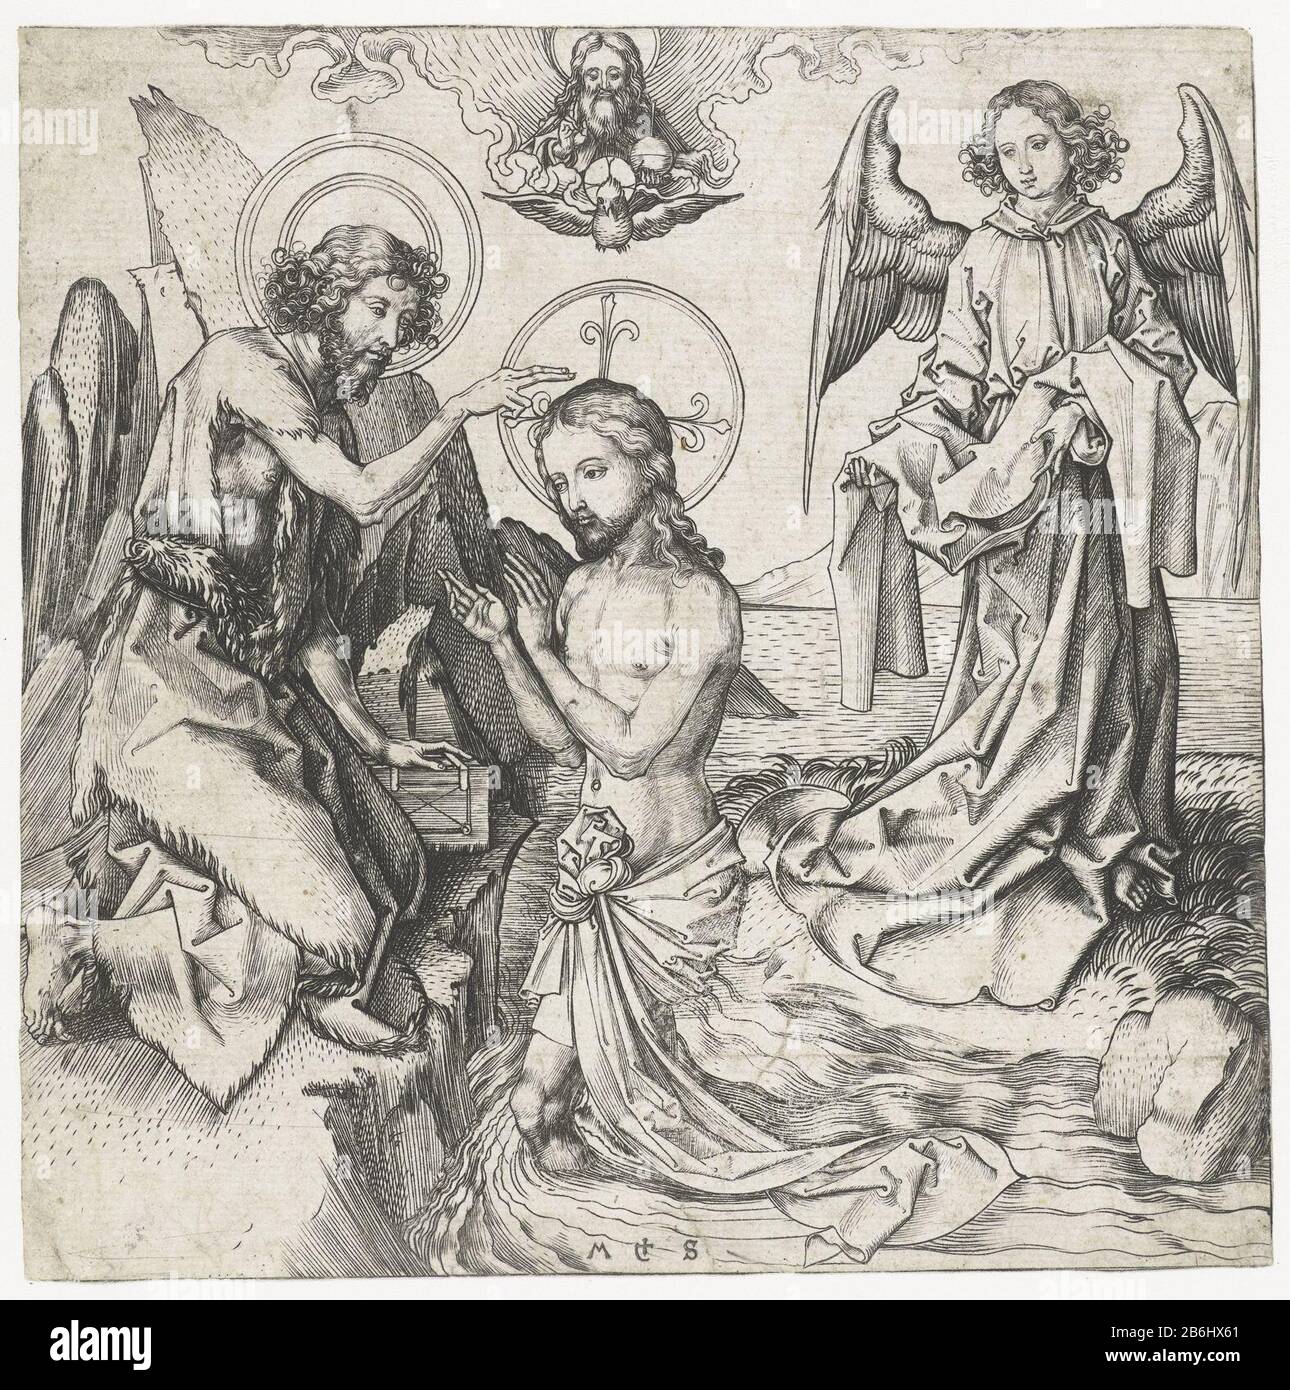 The Baptism of Christ Christ stands in a river behind him holding an angel fixed his clothes. John baptizes him, kneeling on the shore. Above Christ's head appear God and the Holy Spirit in the form of a duif. Manufacturer : printmaker Martin Schongauer (listed property) Place manufacture: Germany Date: 1470 - 1490 Physical features: car material: paper Technique: engra (printing process) Dimensions: leaf : h 155 mm × W 155 mm Subject: baptism of Christ in the river Jordan John the Baptist pouring out water on Christ's head: the Holy Ghost descends Stock Photo